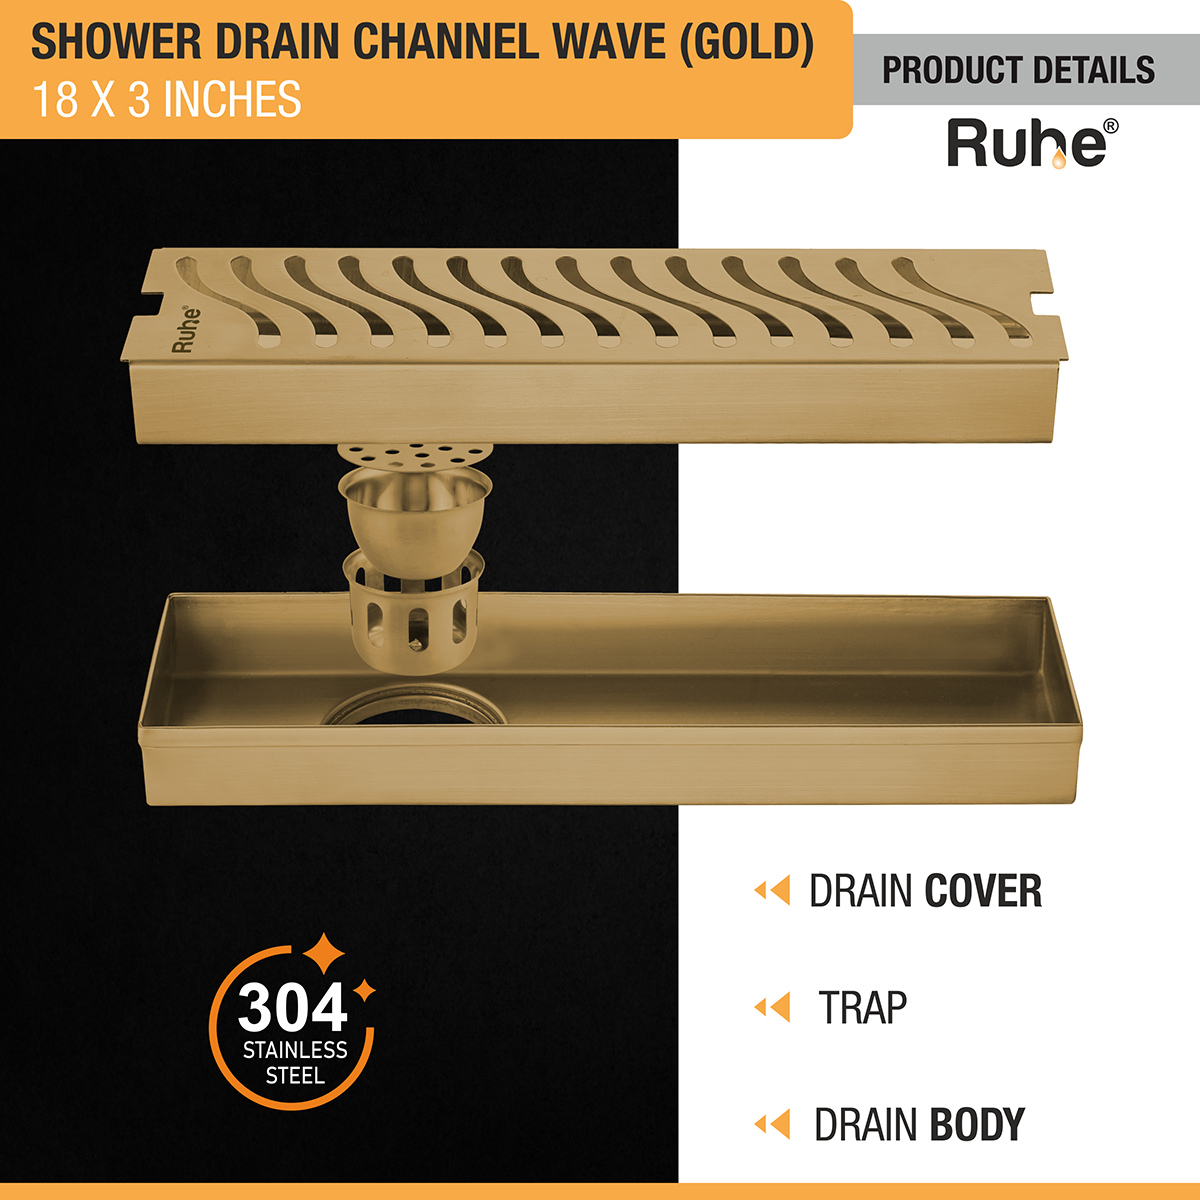 Wave Shower Drain Channel (18 x 3 Inches) YELLOW GOLD product details